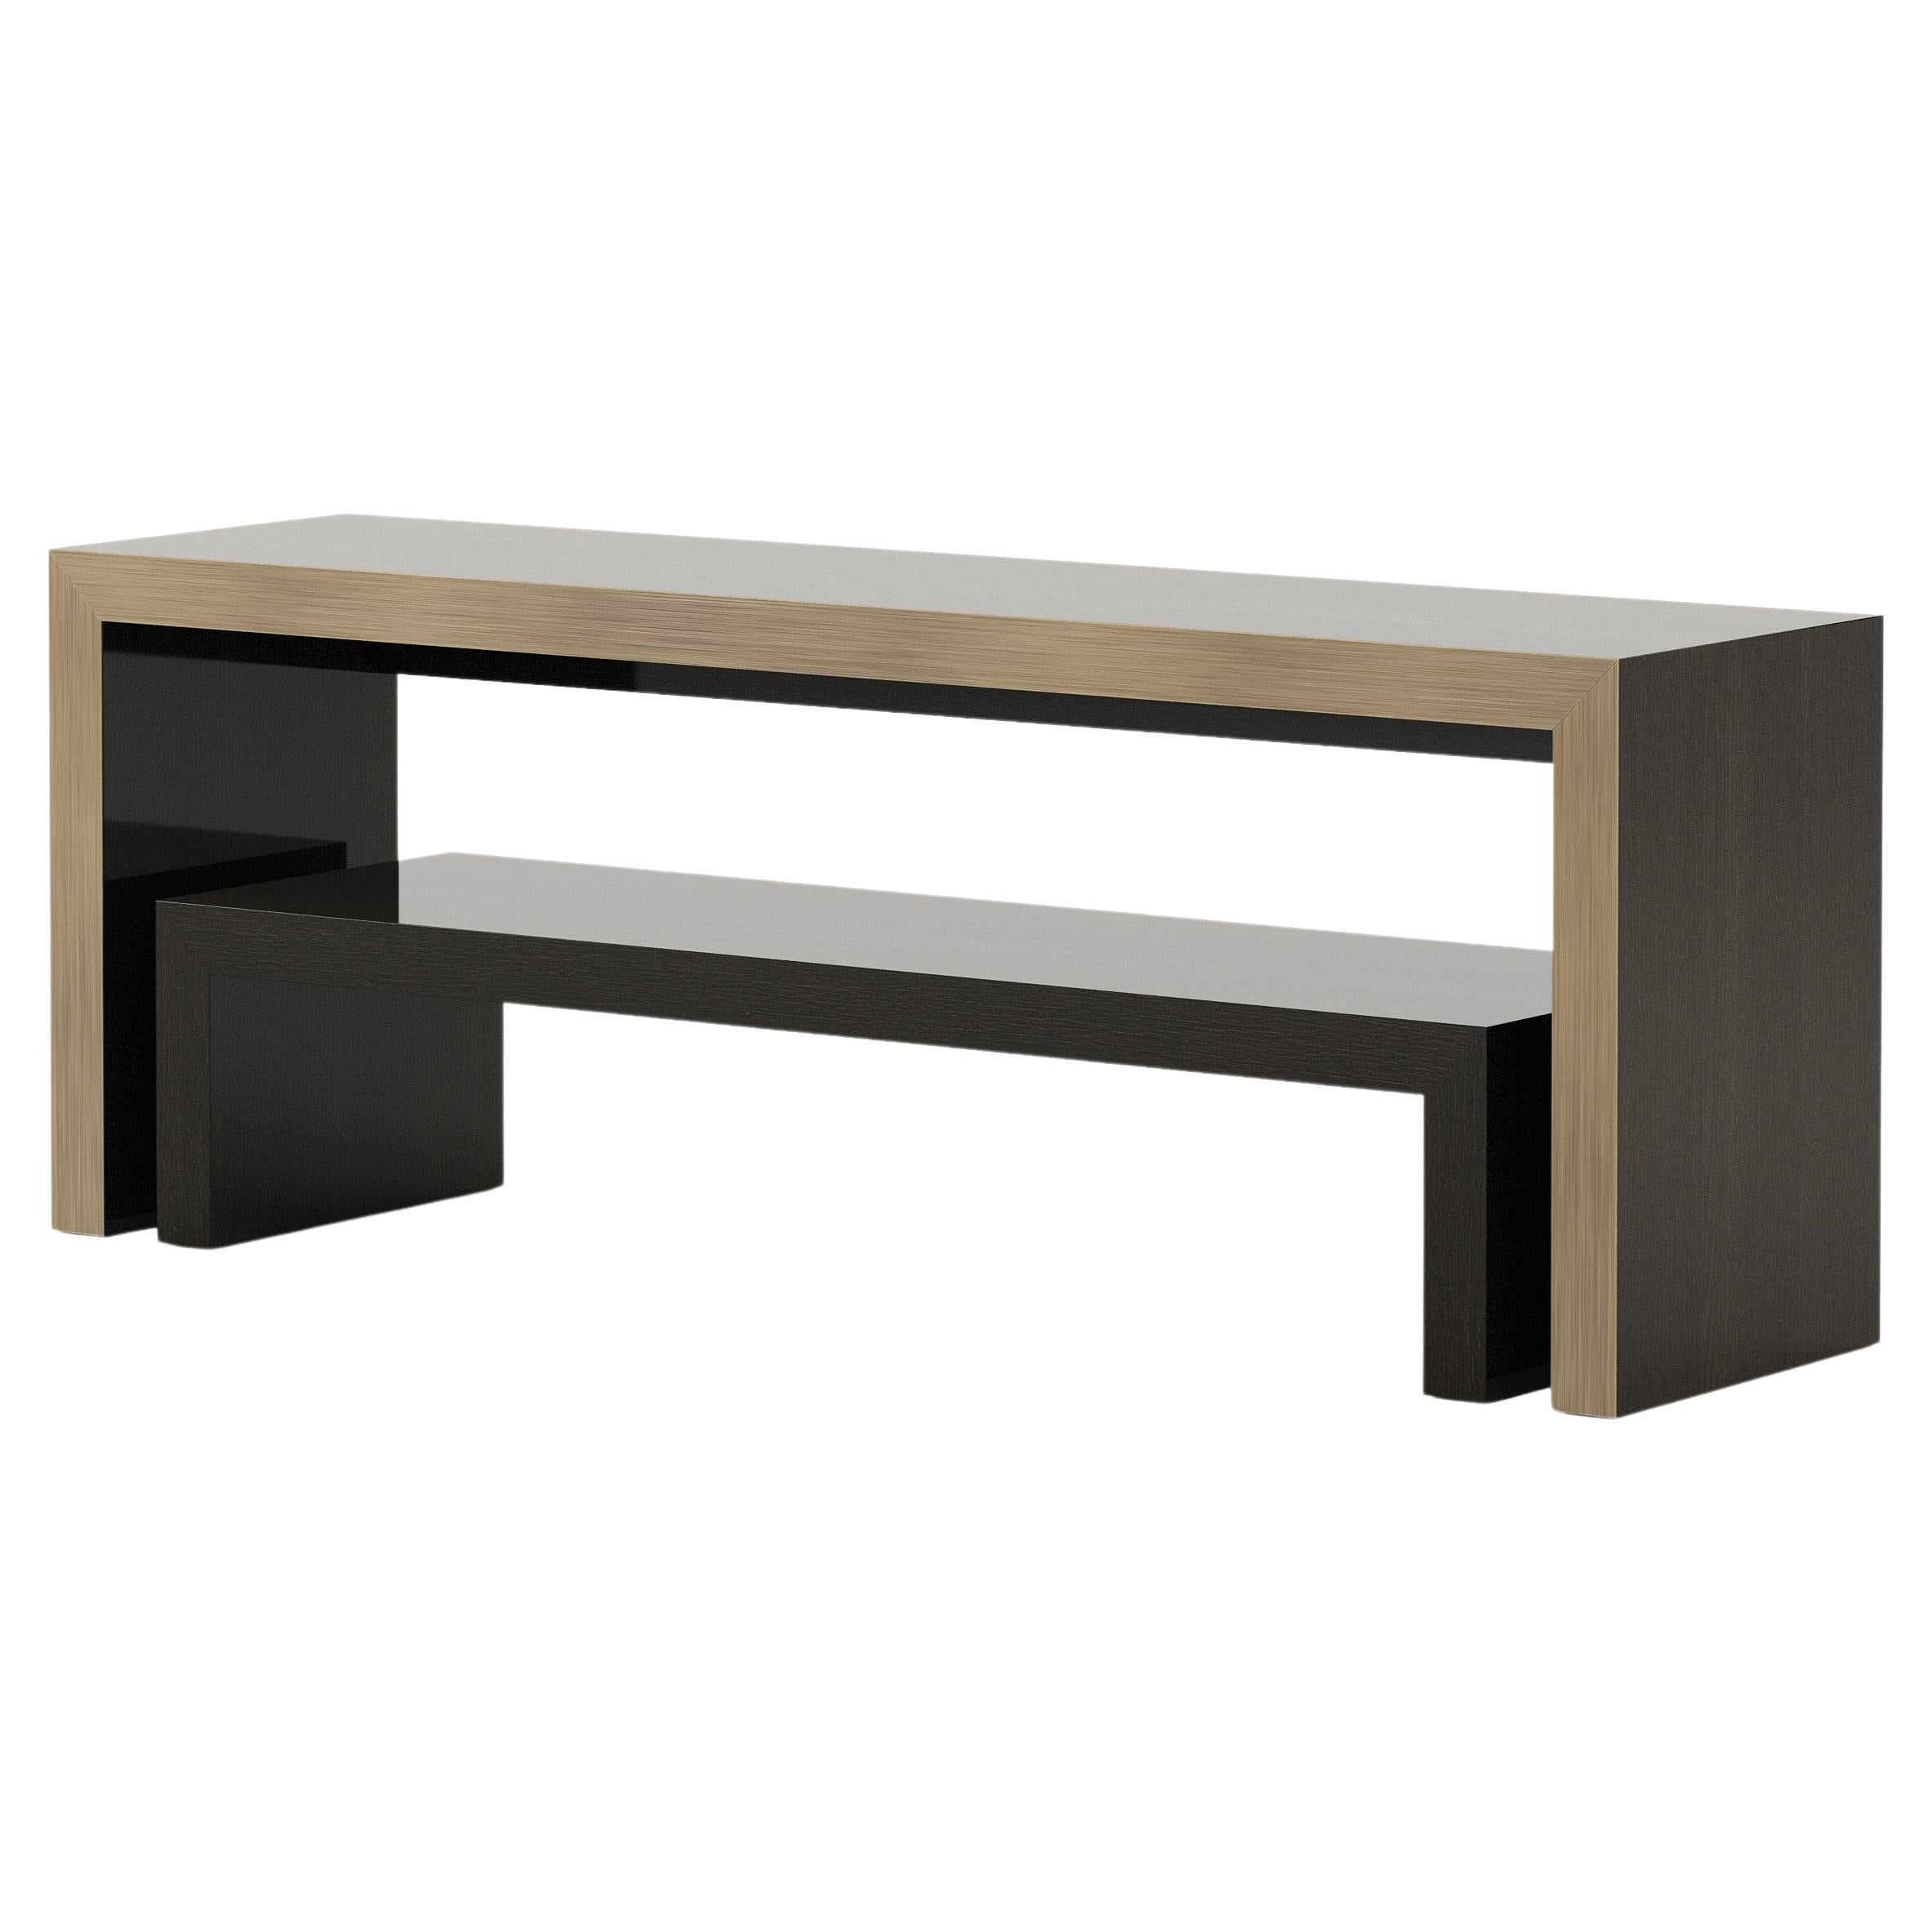 Set Bridge Console made with Oak, Brass and Lacquer, handmade by Stylish Club For Sale